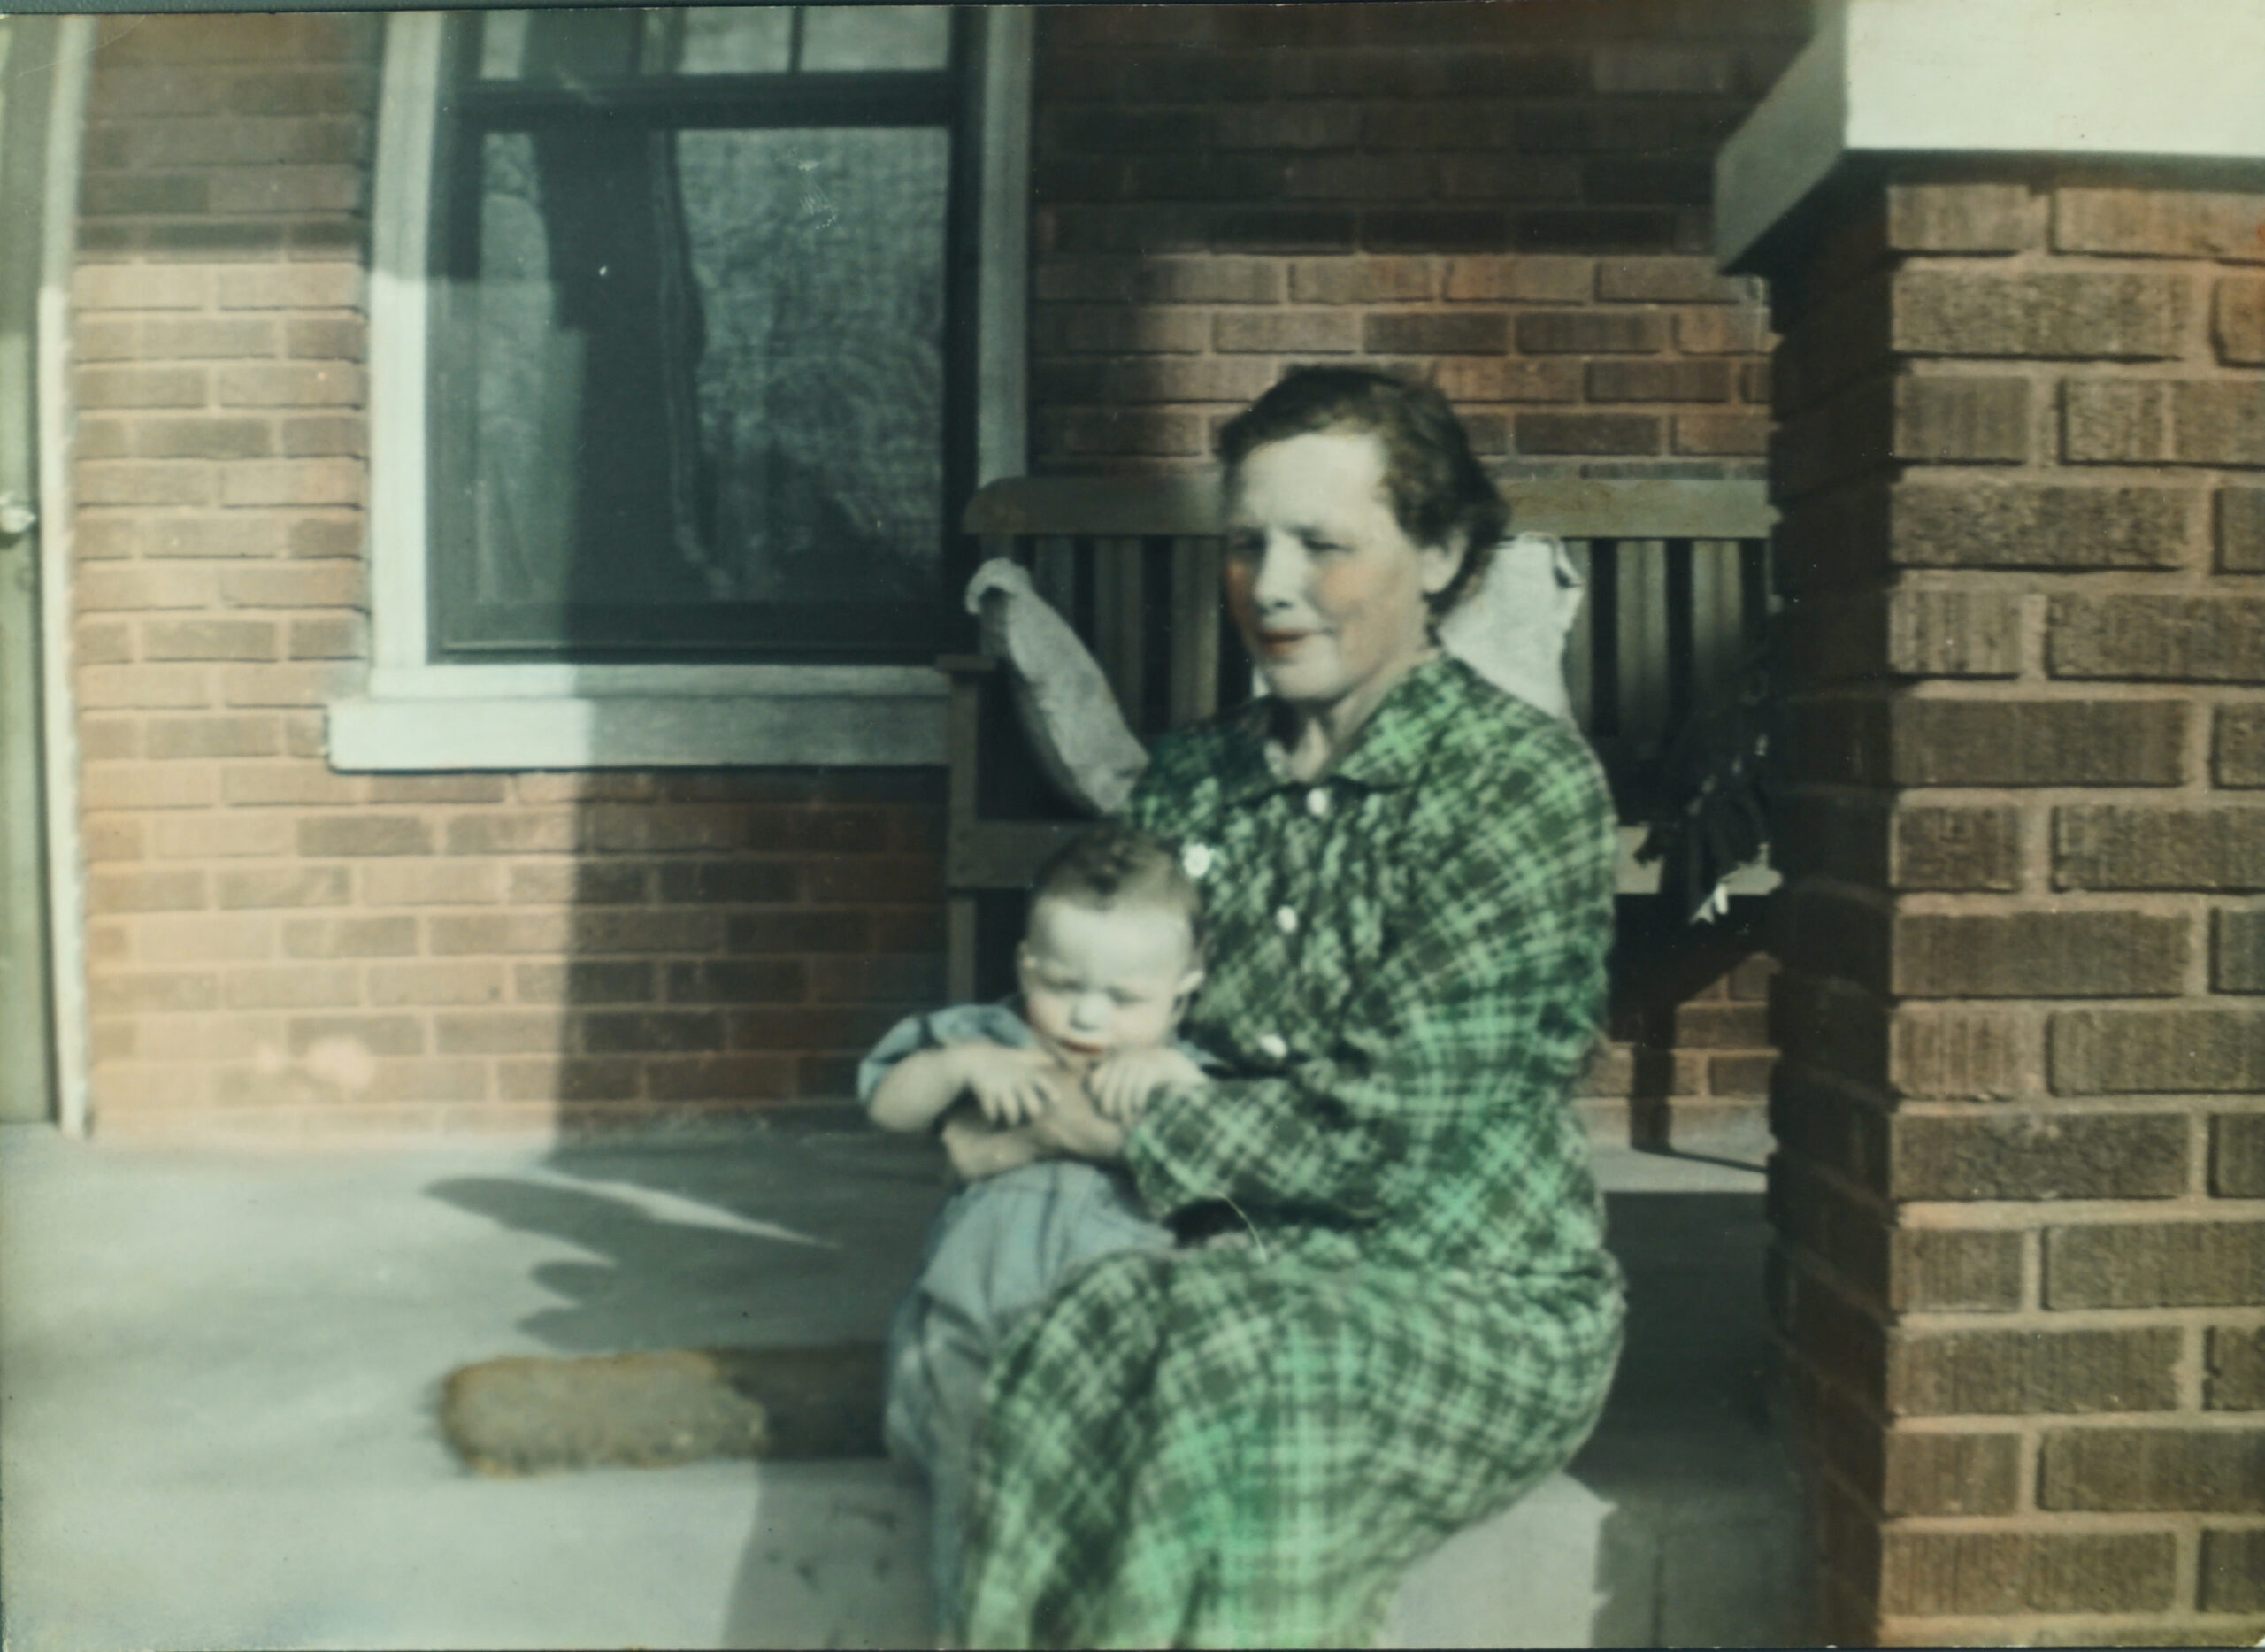 Chappell as a child with his grandmother